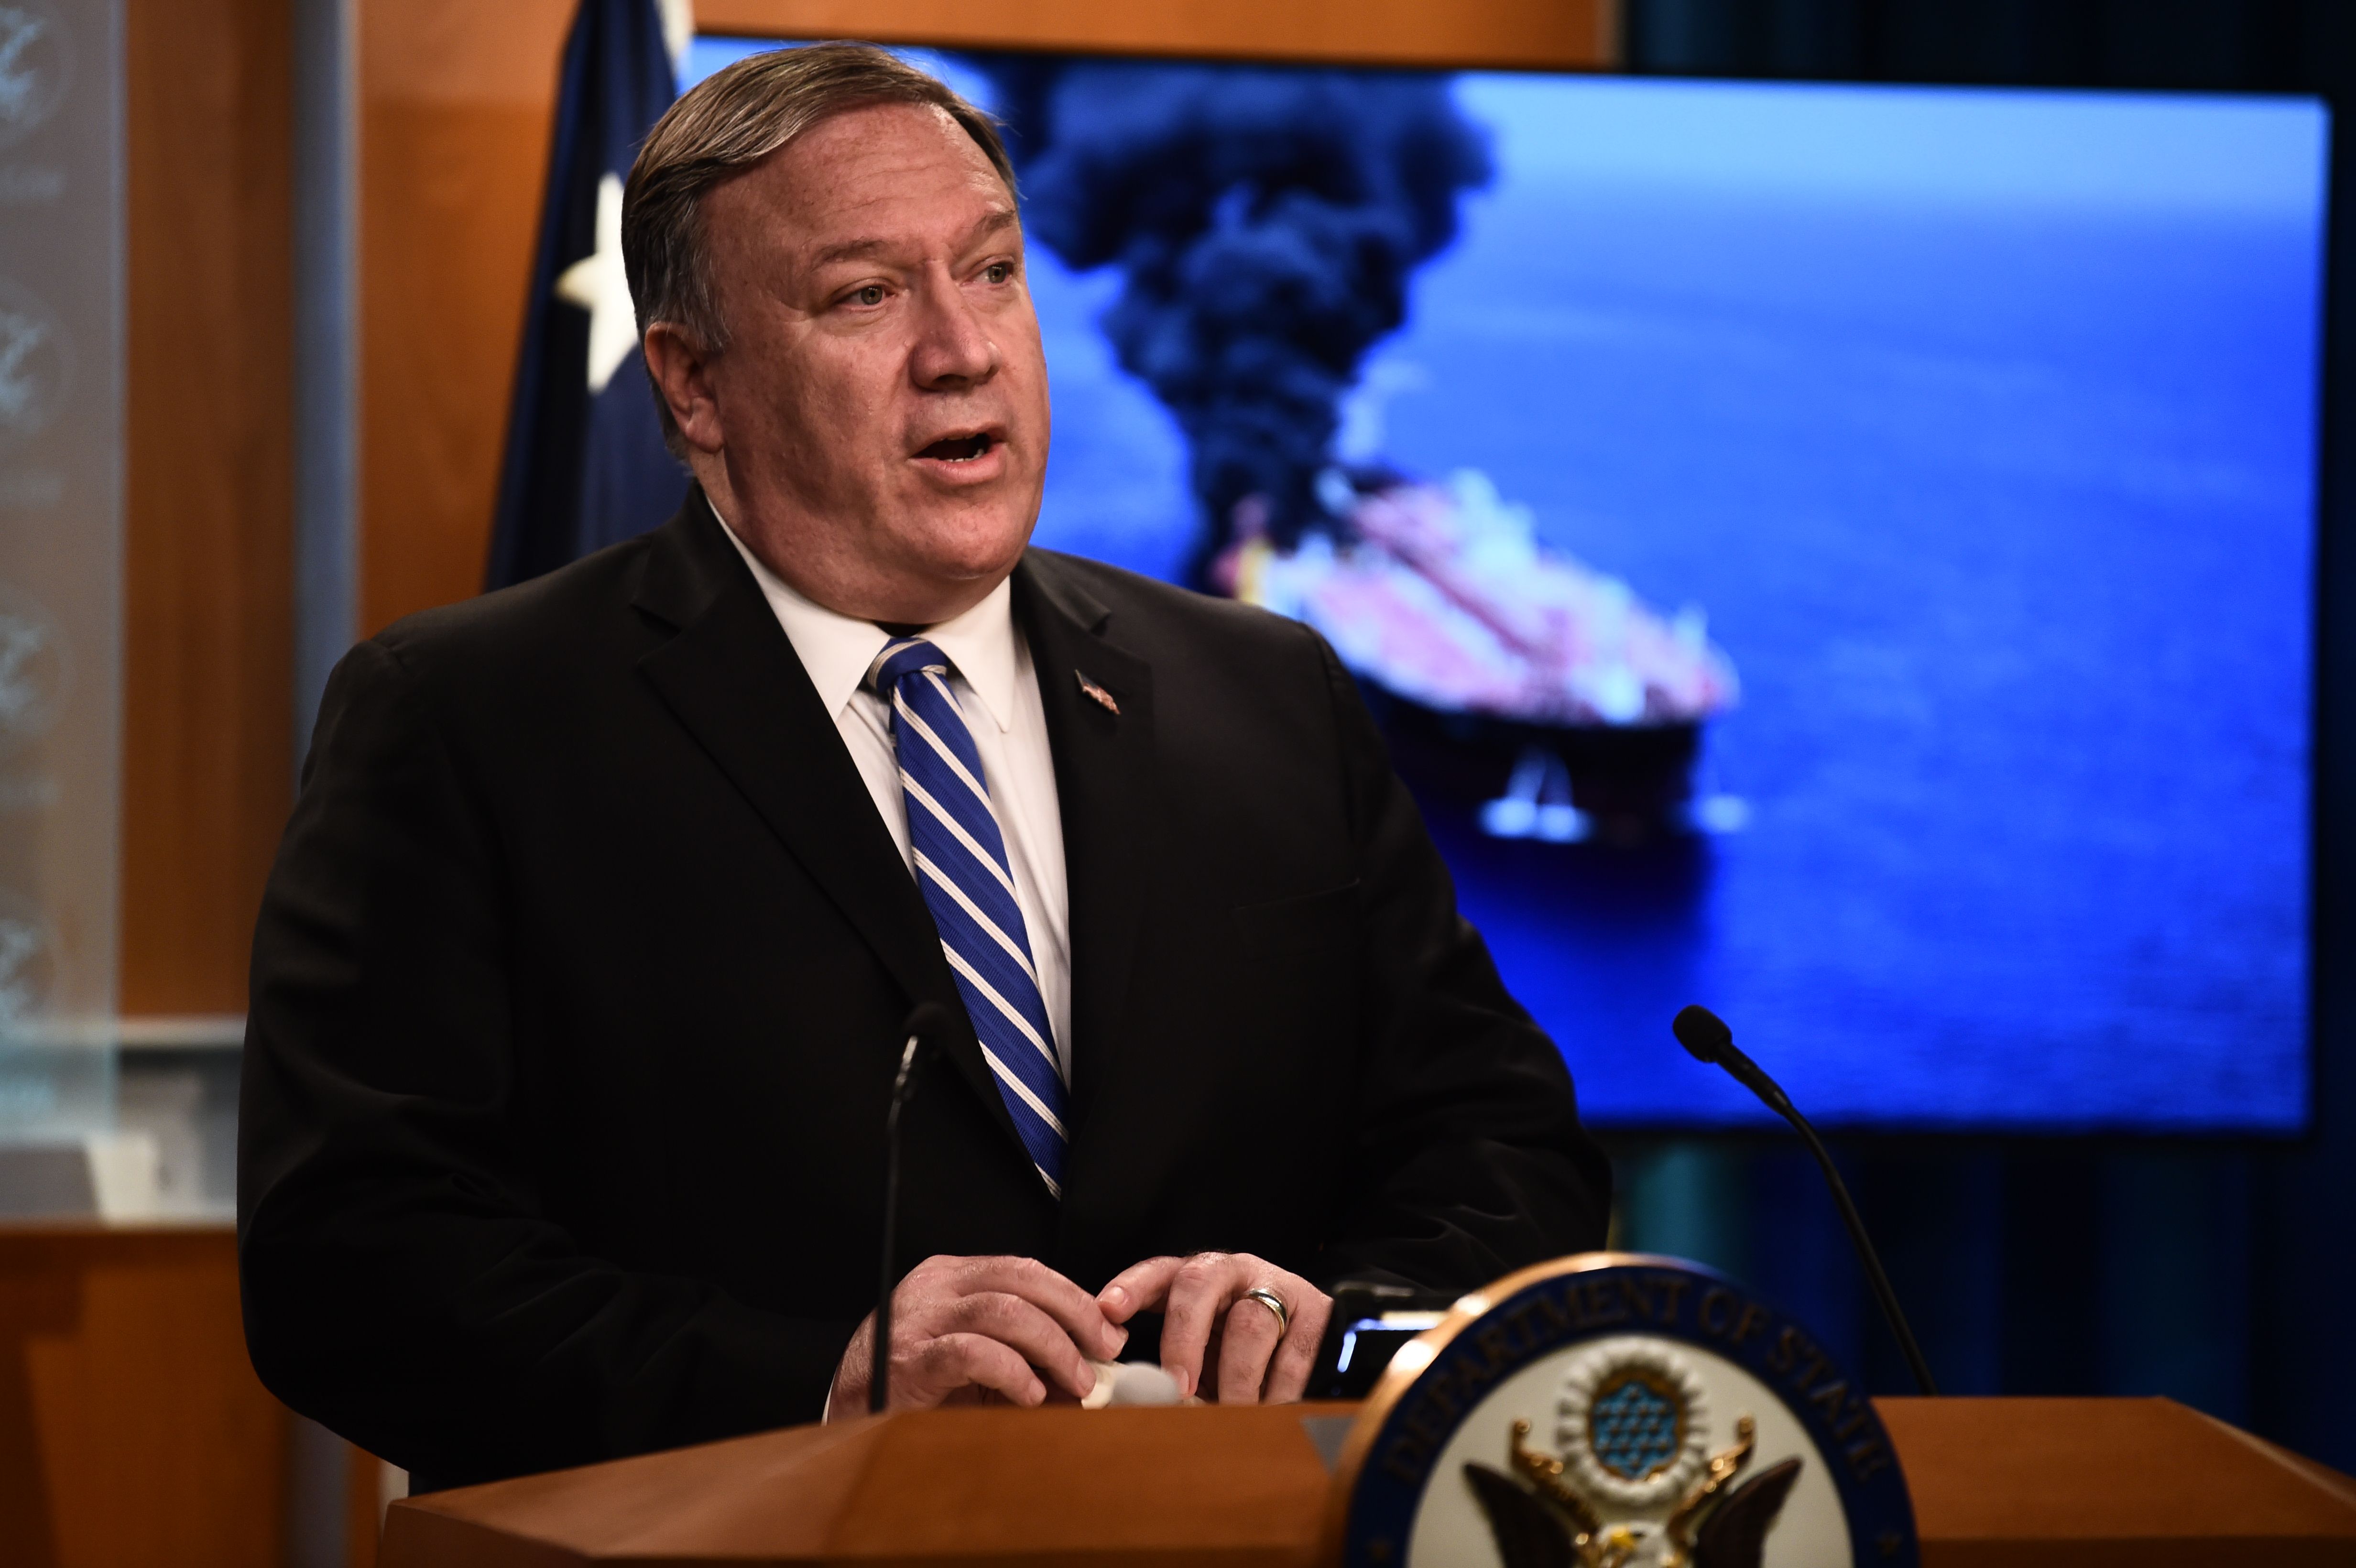 US Secretary of State Mike Pompeo delivers remarks to the media at the State Department in Washington, DC on June 13, 2019. - US Secretary of State Mike Pompeo accused Iran of being behind attacks on two tanks in the Gulf of Oman Thursday, and said it was taking the case to the UN Security Council."It is the assessment of the United States that the Islamic Republic of Iran is responsible for the attacks," Pompeo told reporters. (ERIC BARADAT/AFP/Getty Images)